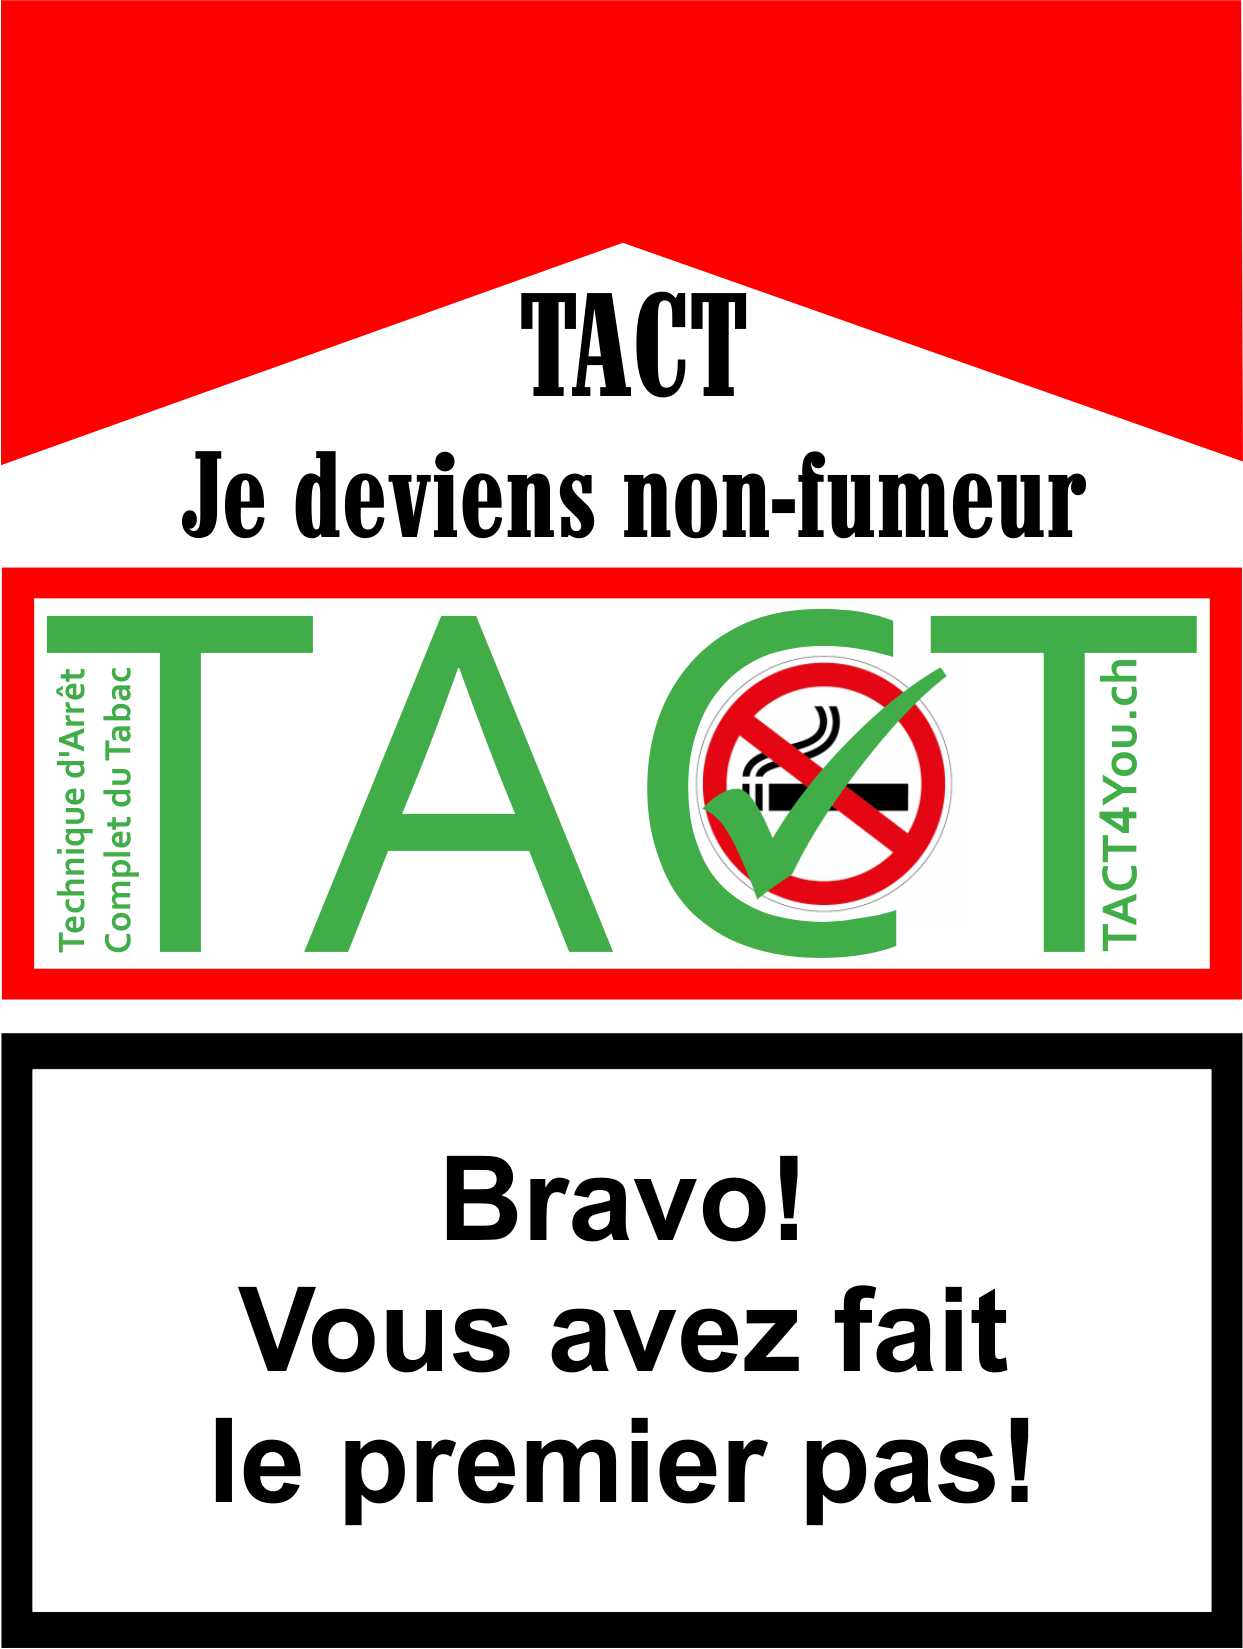 tact4you.ch